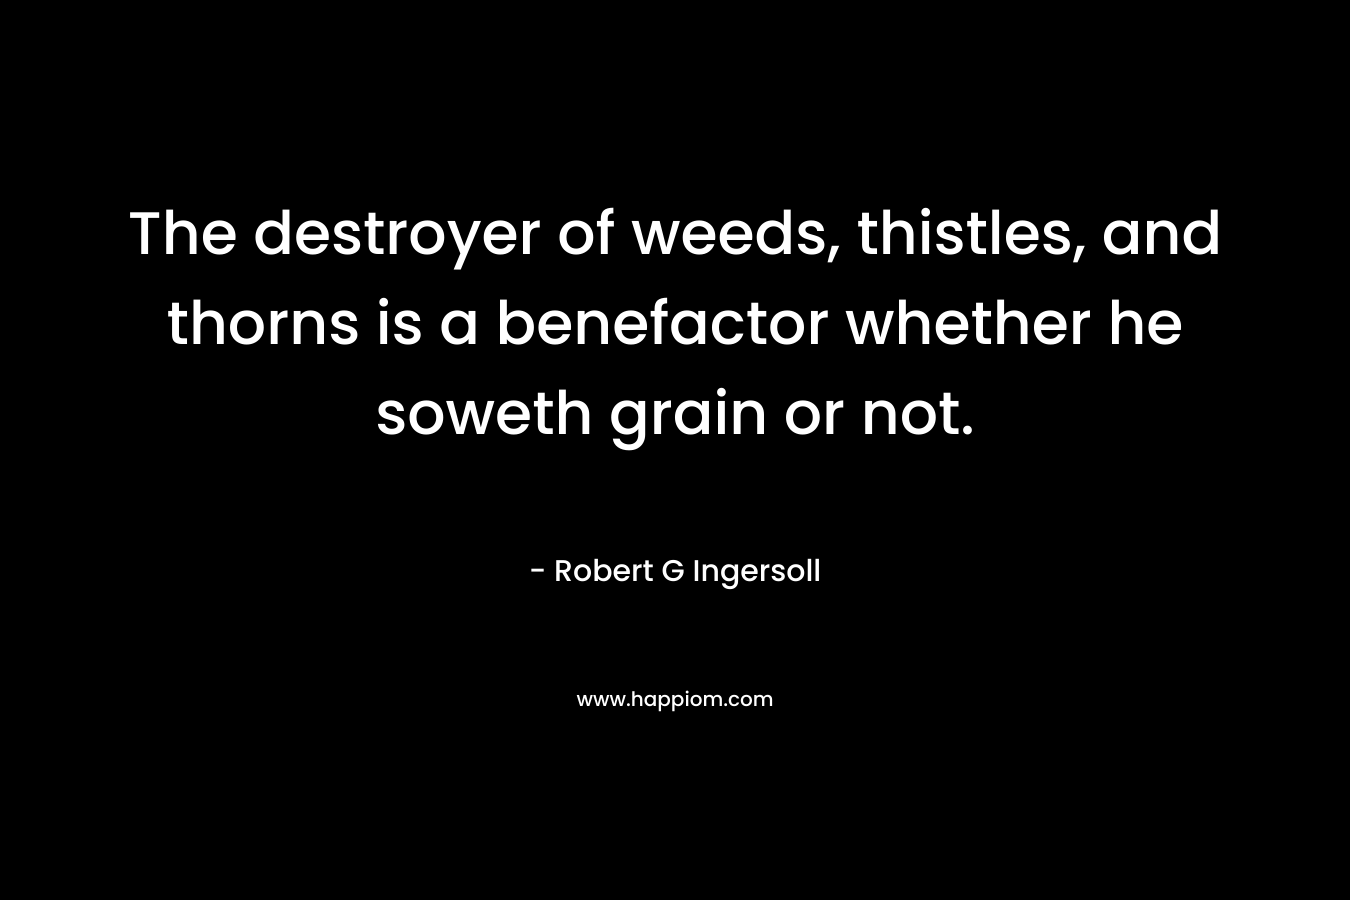 The destroyer of weeds, thistles, and thorns is a benefactor whether he soweth grain or not. – Robert G Ingersoll